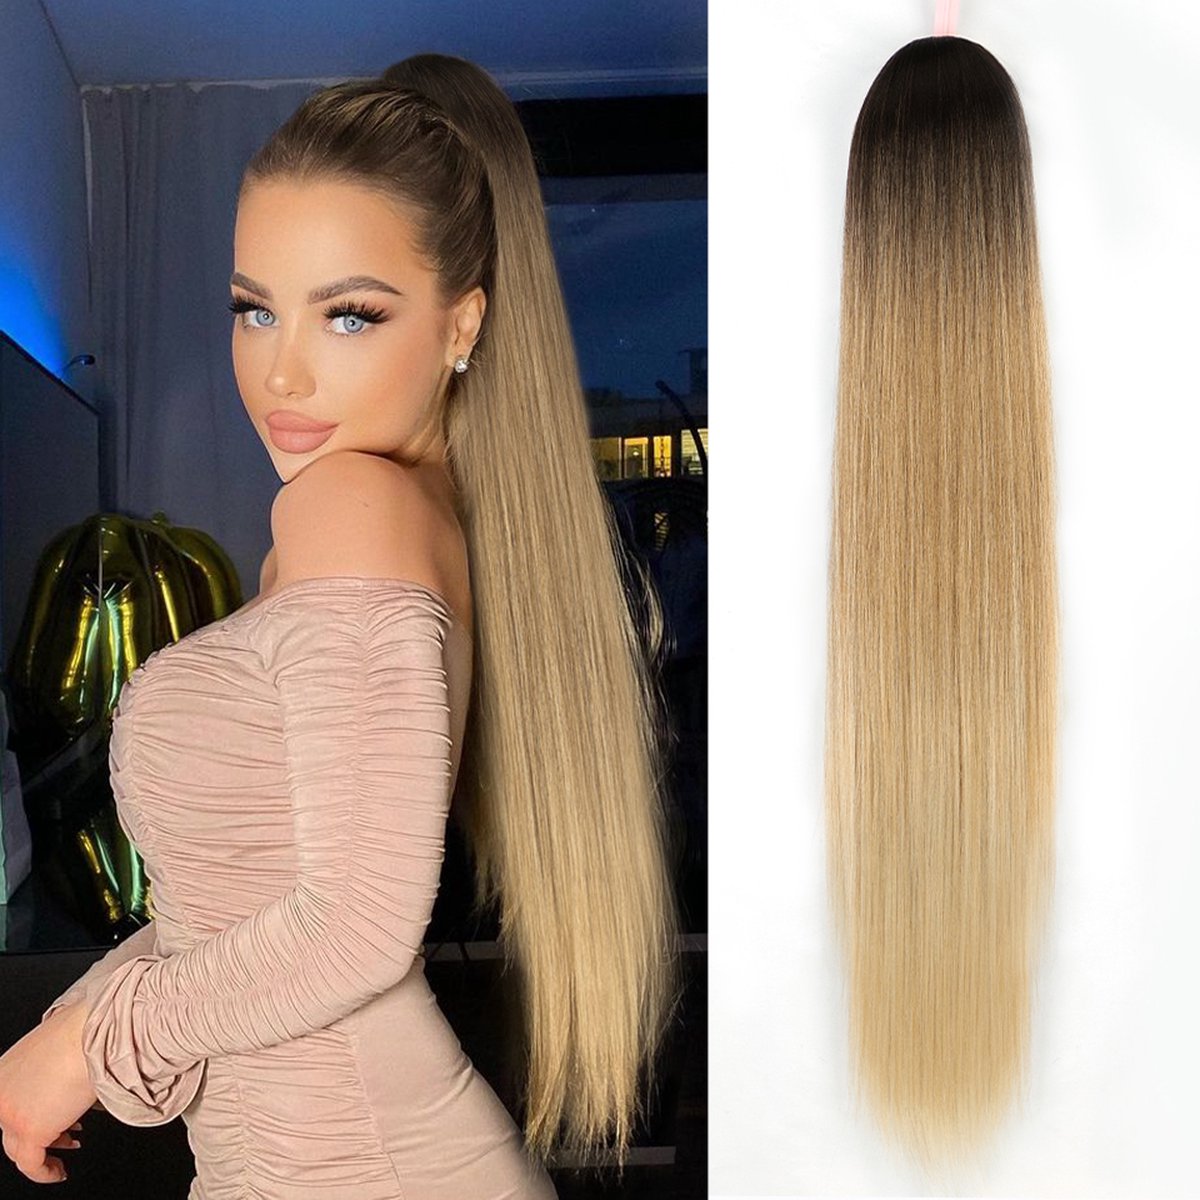 Miss Ponytails - Straight ponytail extentions - 26 inch - Blond / Zwart T4/126/613 - Hair extentions - Haarverlenging